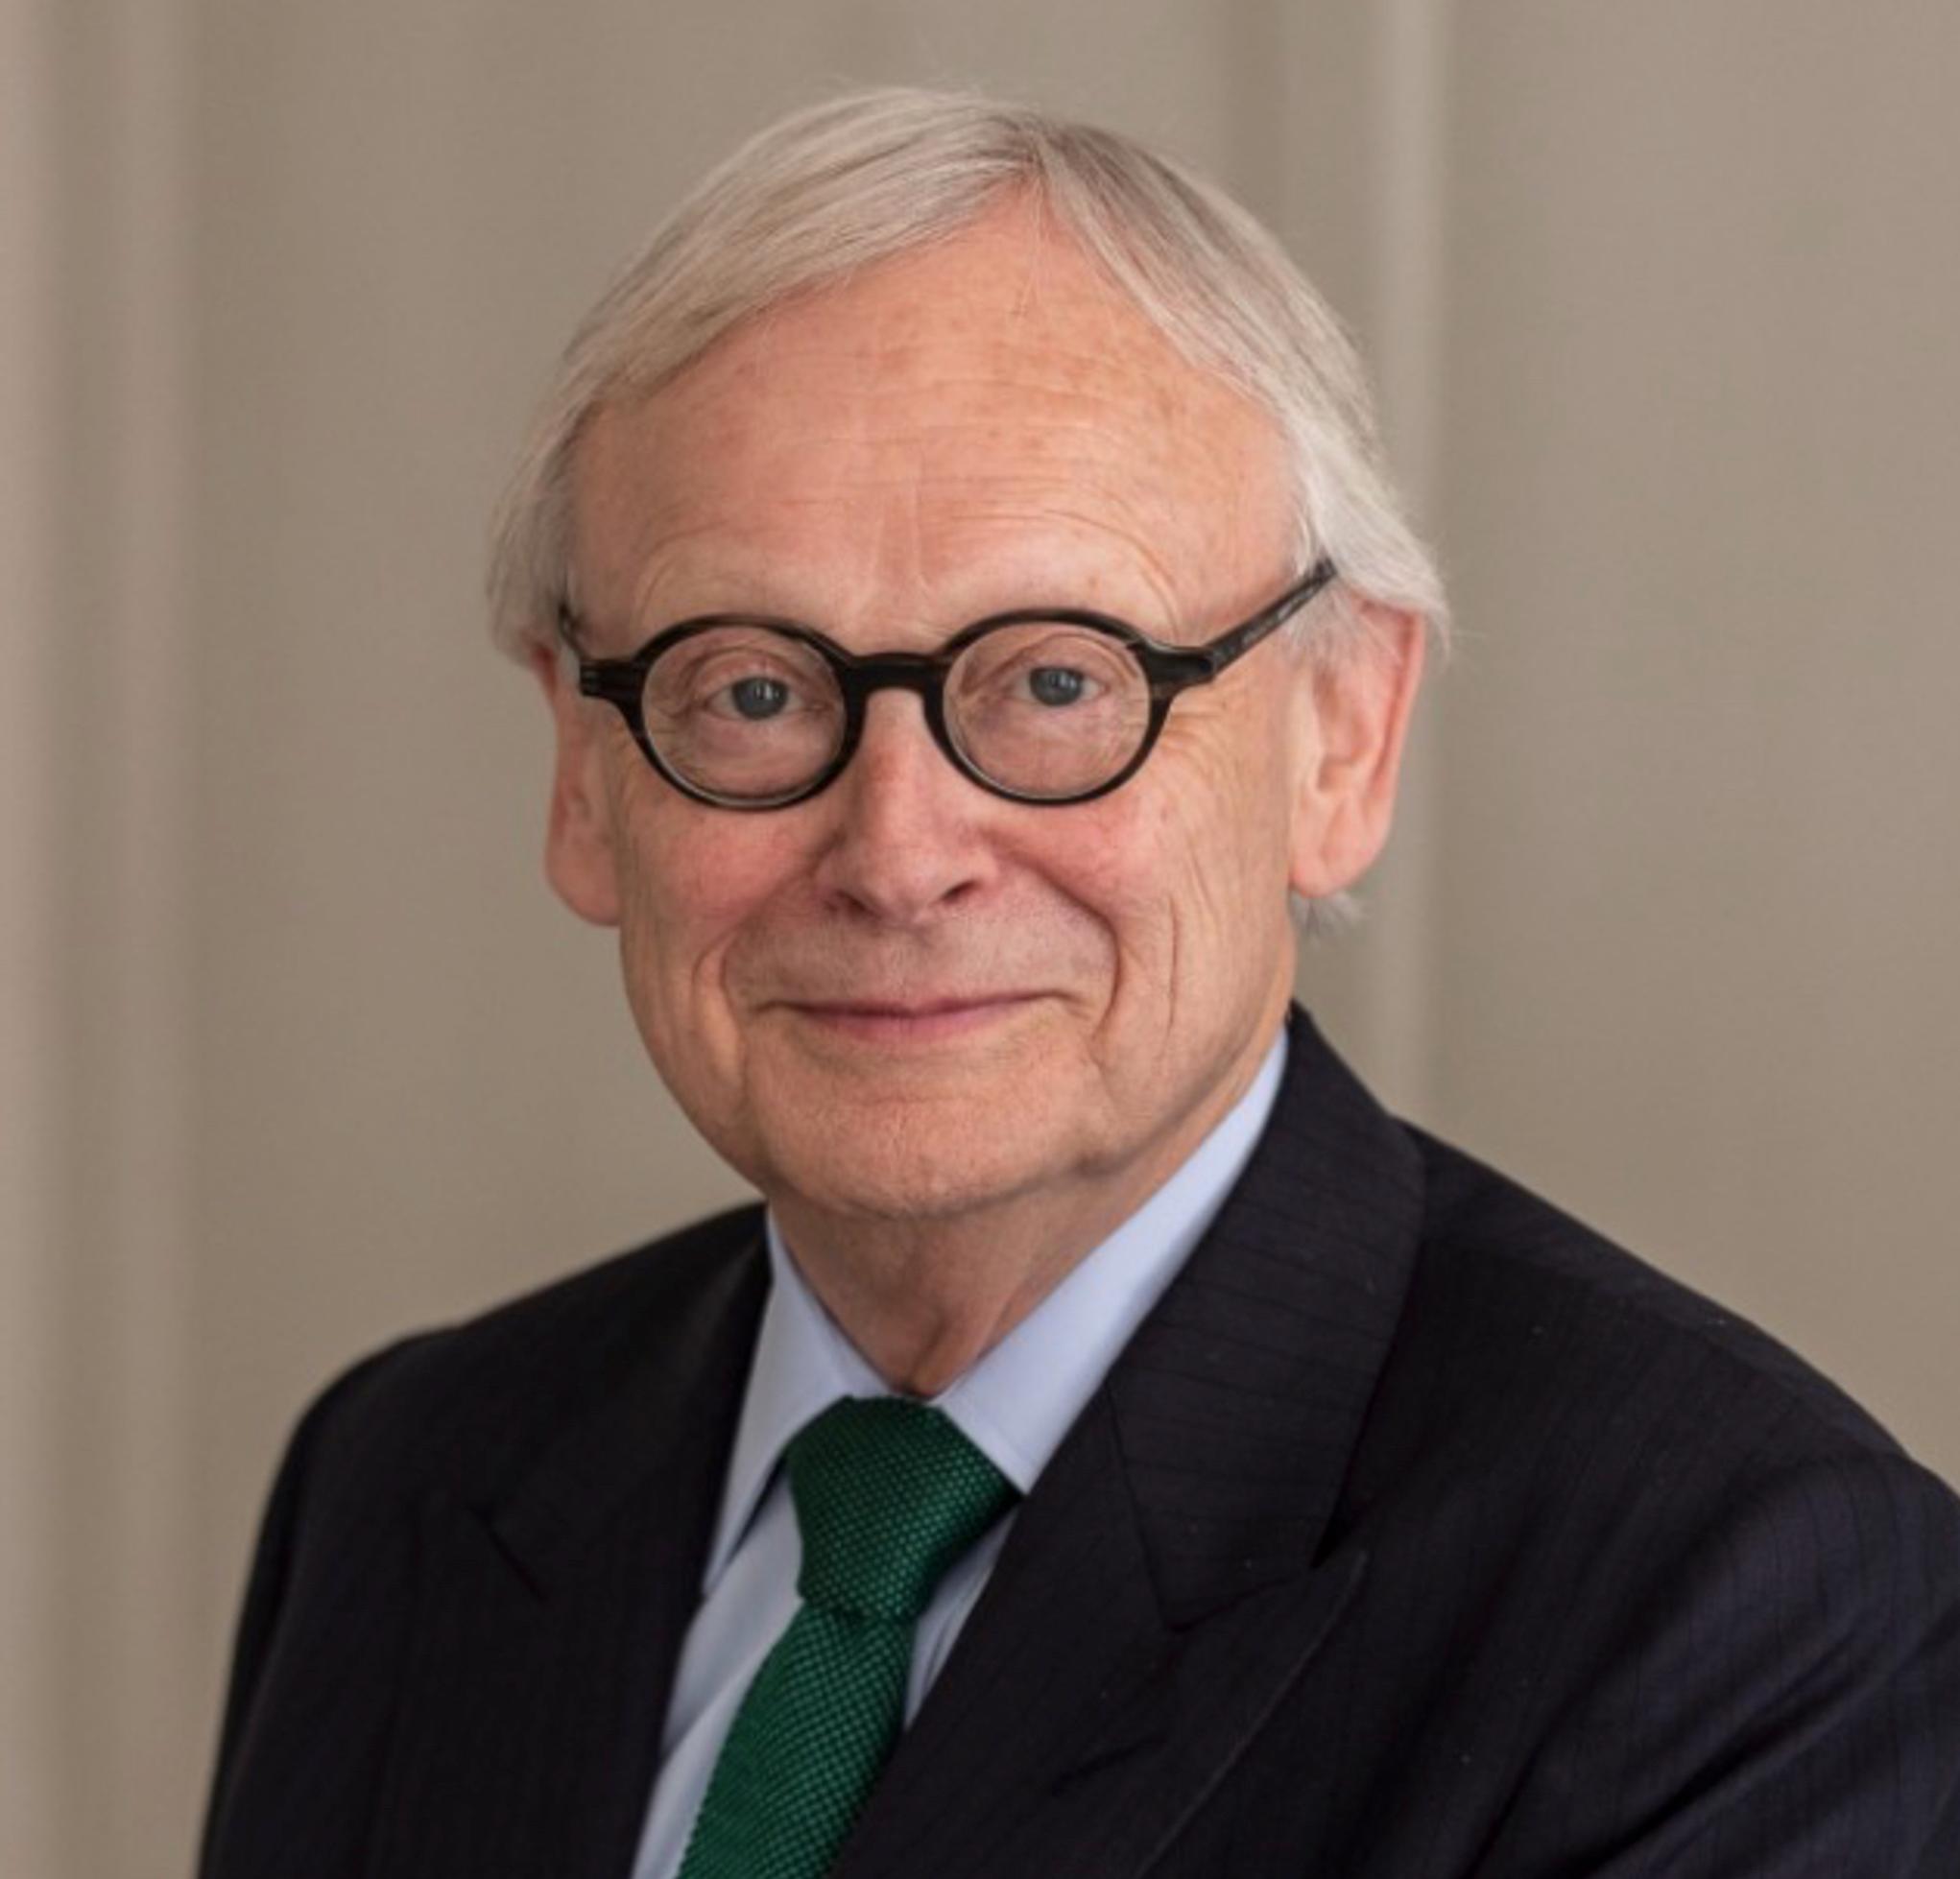 Lord Deben: This is not a report that suggests satisfactory progress